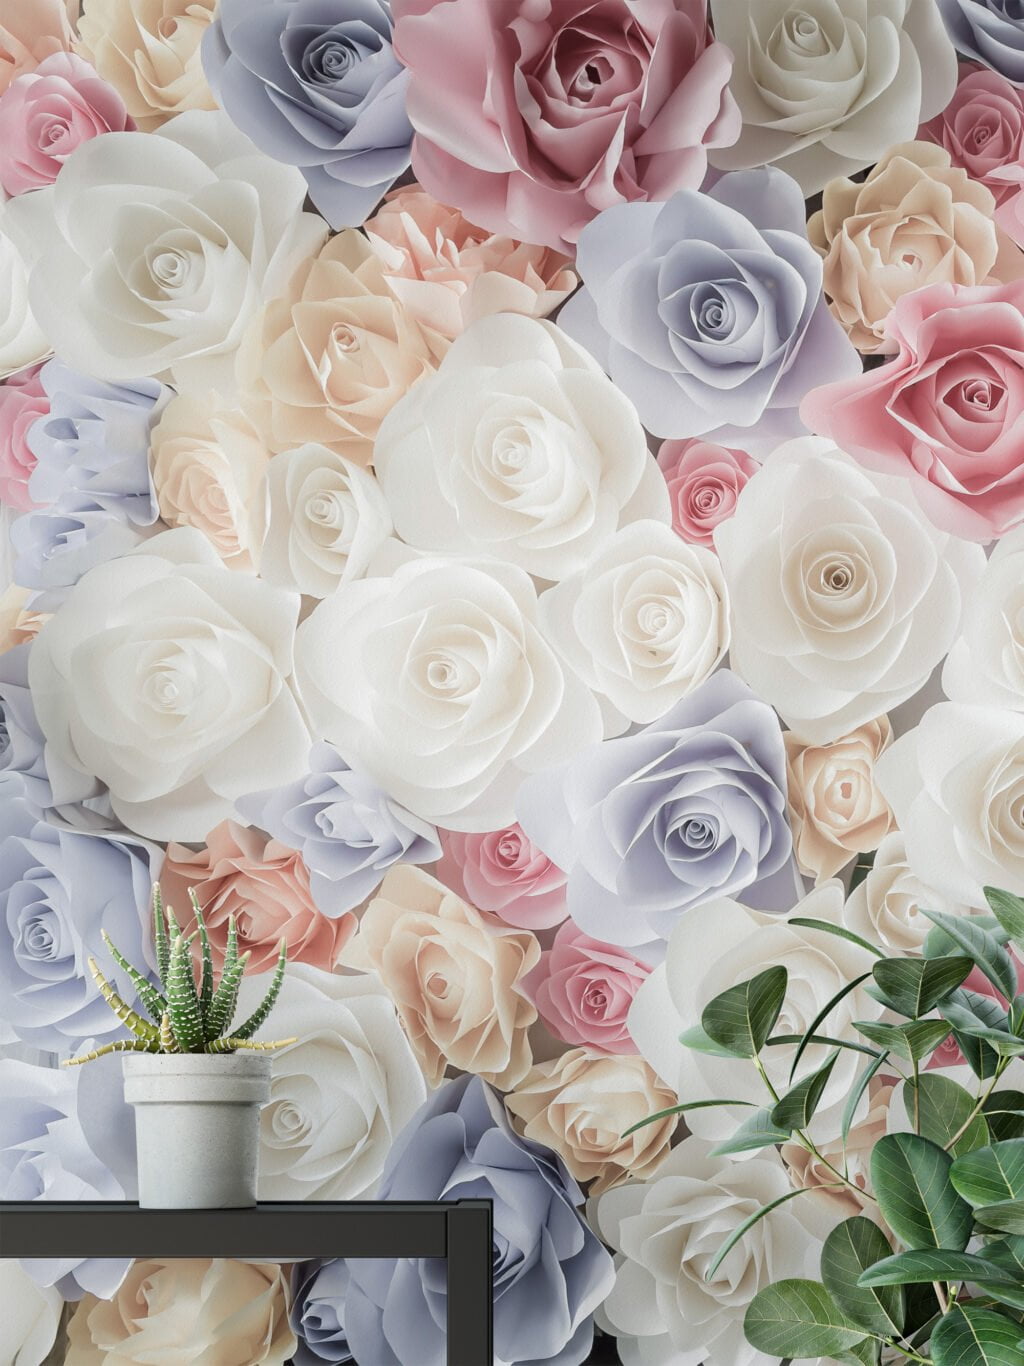 Pastel Purple and Pink Roses Wallpaper, Delicate and Romantic Peel and Stick Wall Mural, Self Adhesive Removable Wallpaper for a Dreamy Bedroom